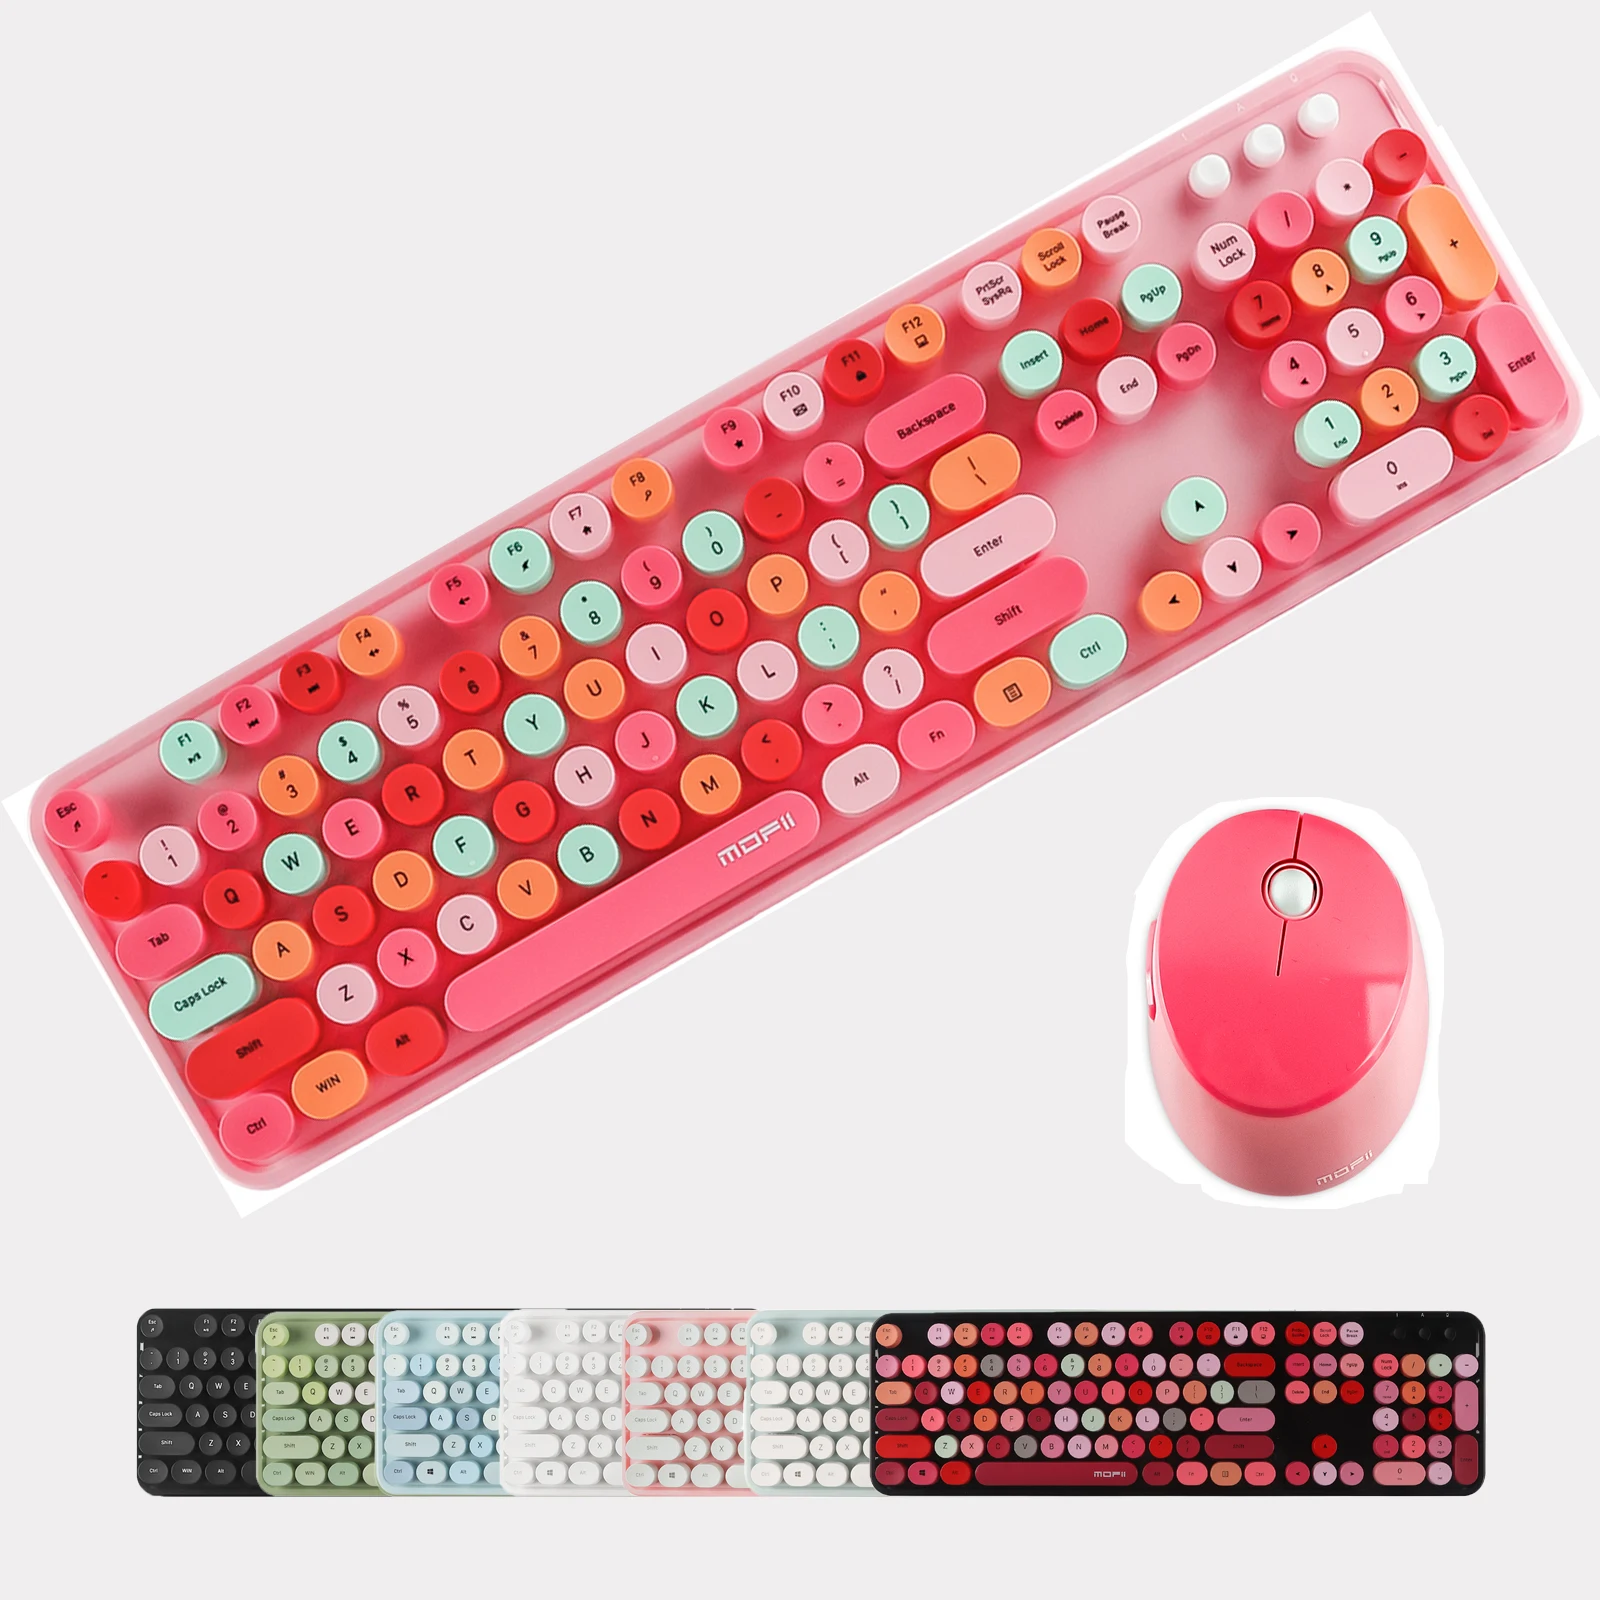 

Wireless 2.4Ghz Keyboard Mouse Combos Optical Mouse 104 Keys Keypad Pink Ergonomic Portable Keyboard And Mouse For Laptop PC